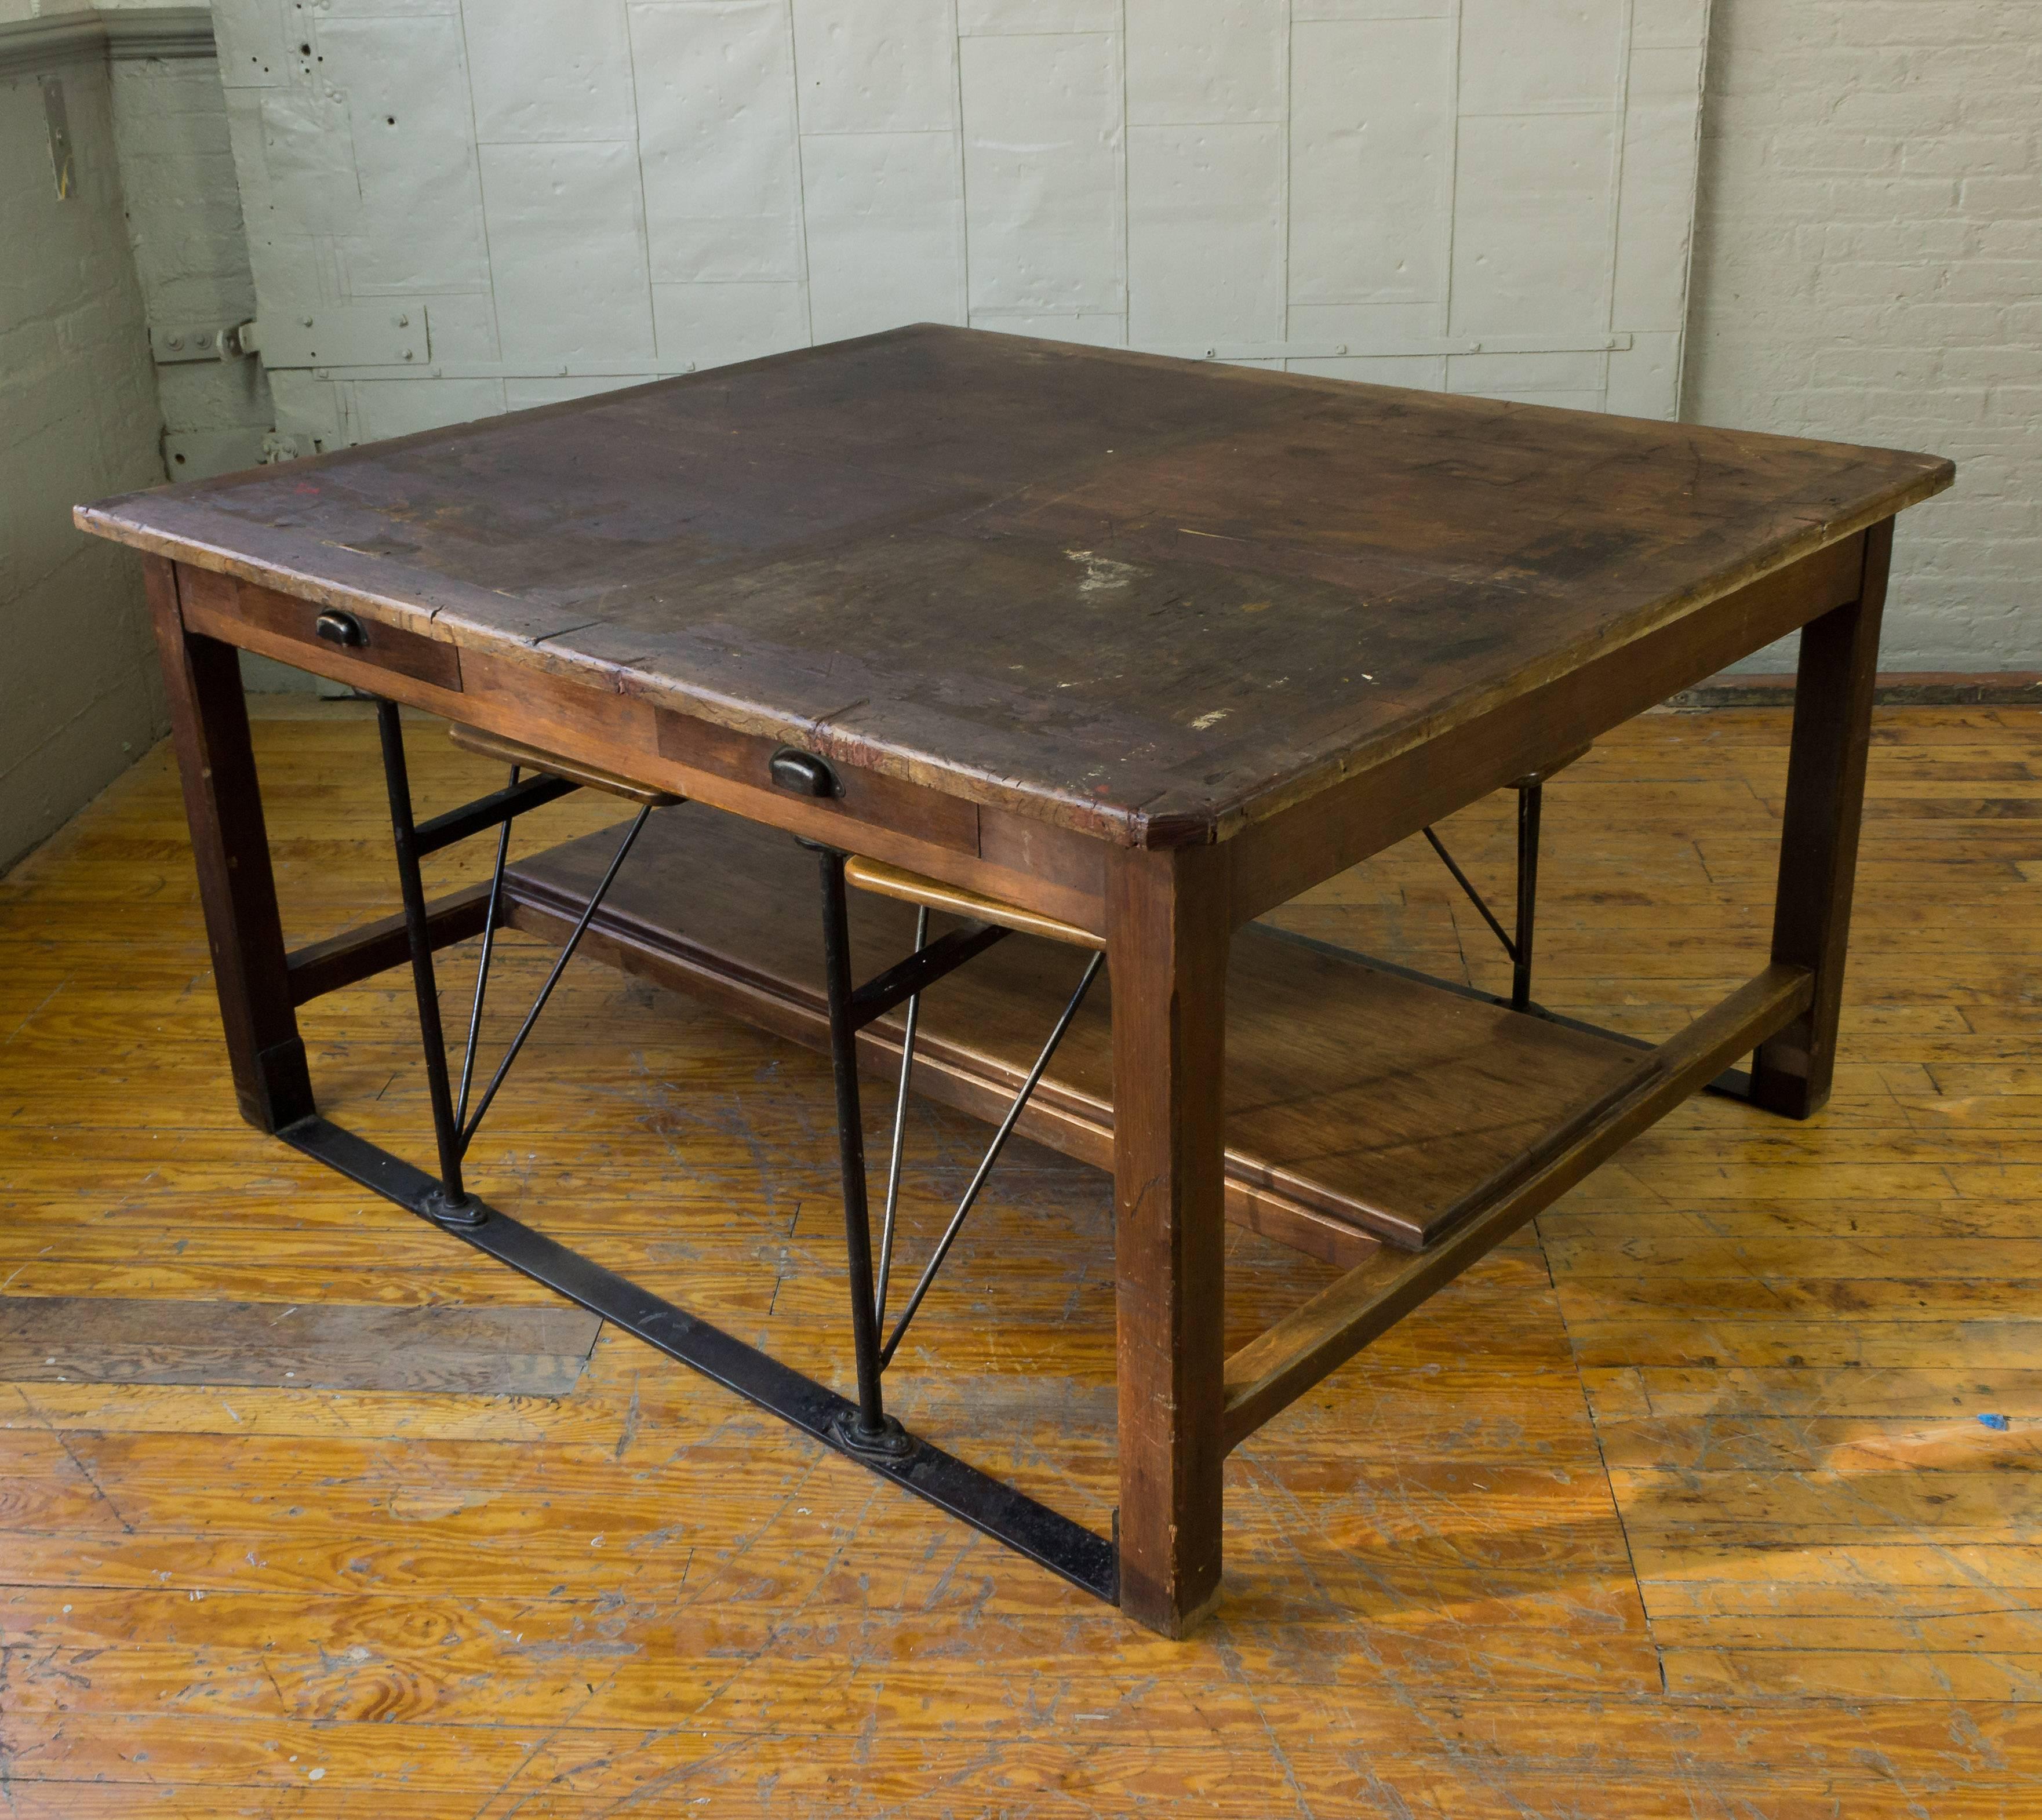 Very amazing Industrial table with twinkle drawers on seat sides. This piece has attached wooden seats that can swing in or out on metal framework. The table is of heavy wood and has a nice vintage patina.